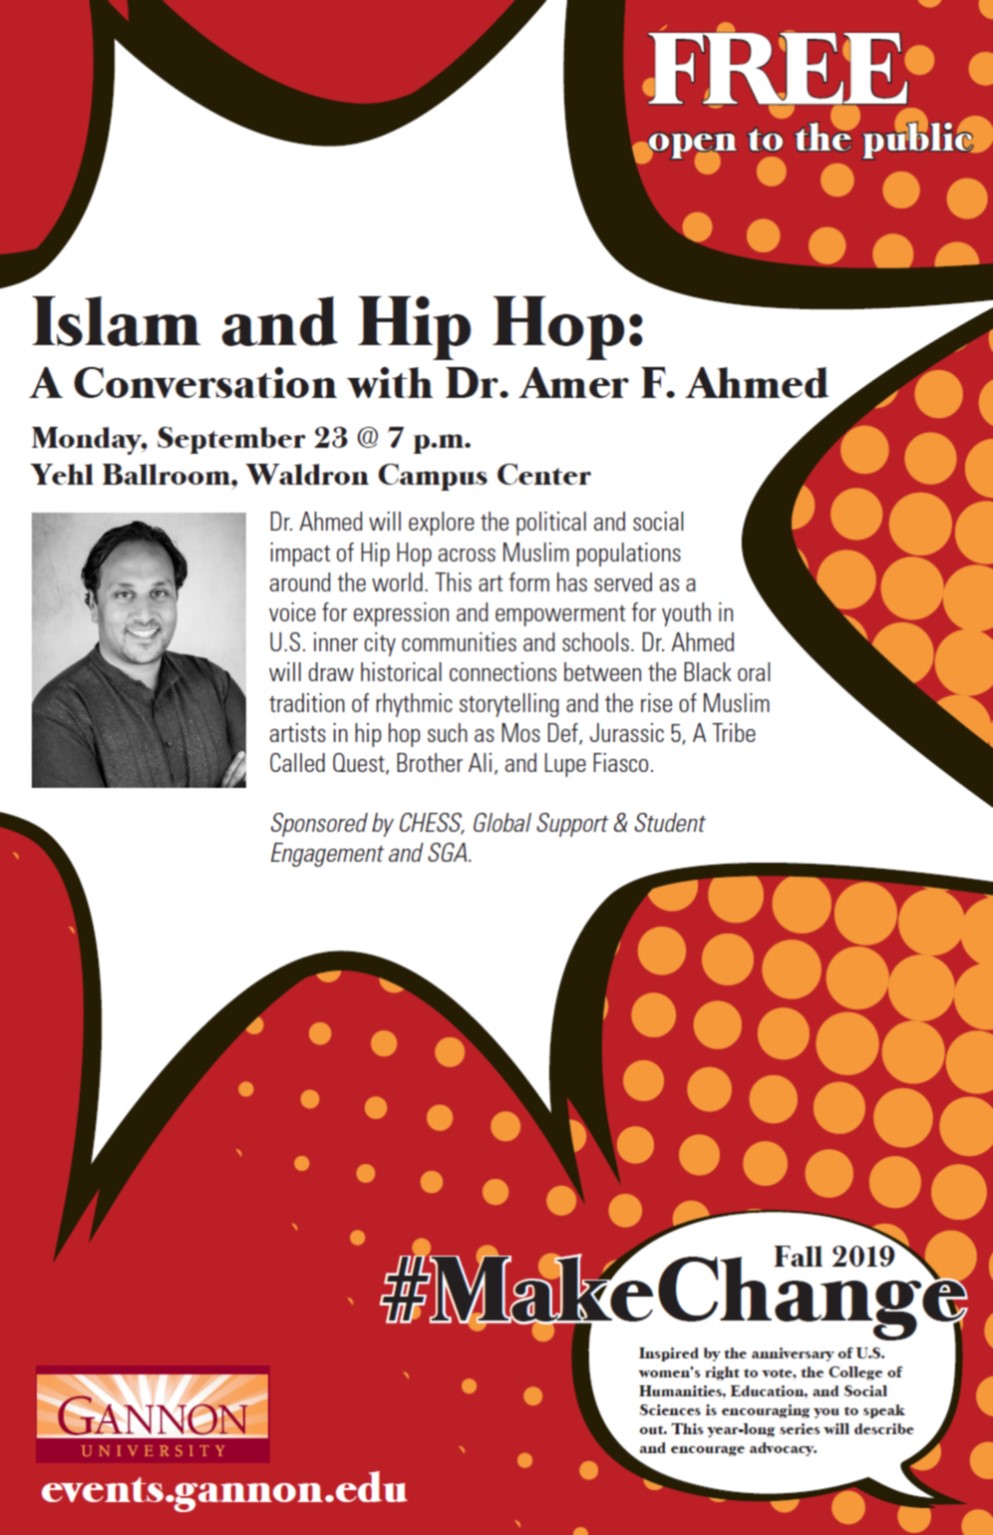 Islam and Hip Hop: A Conversation with Dr. Amer F. Ahmed